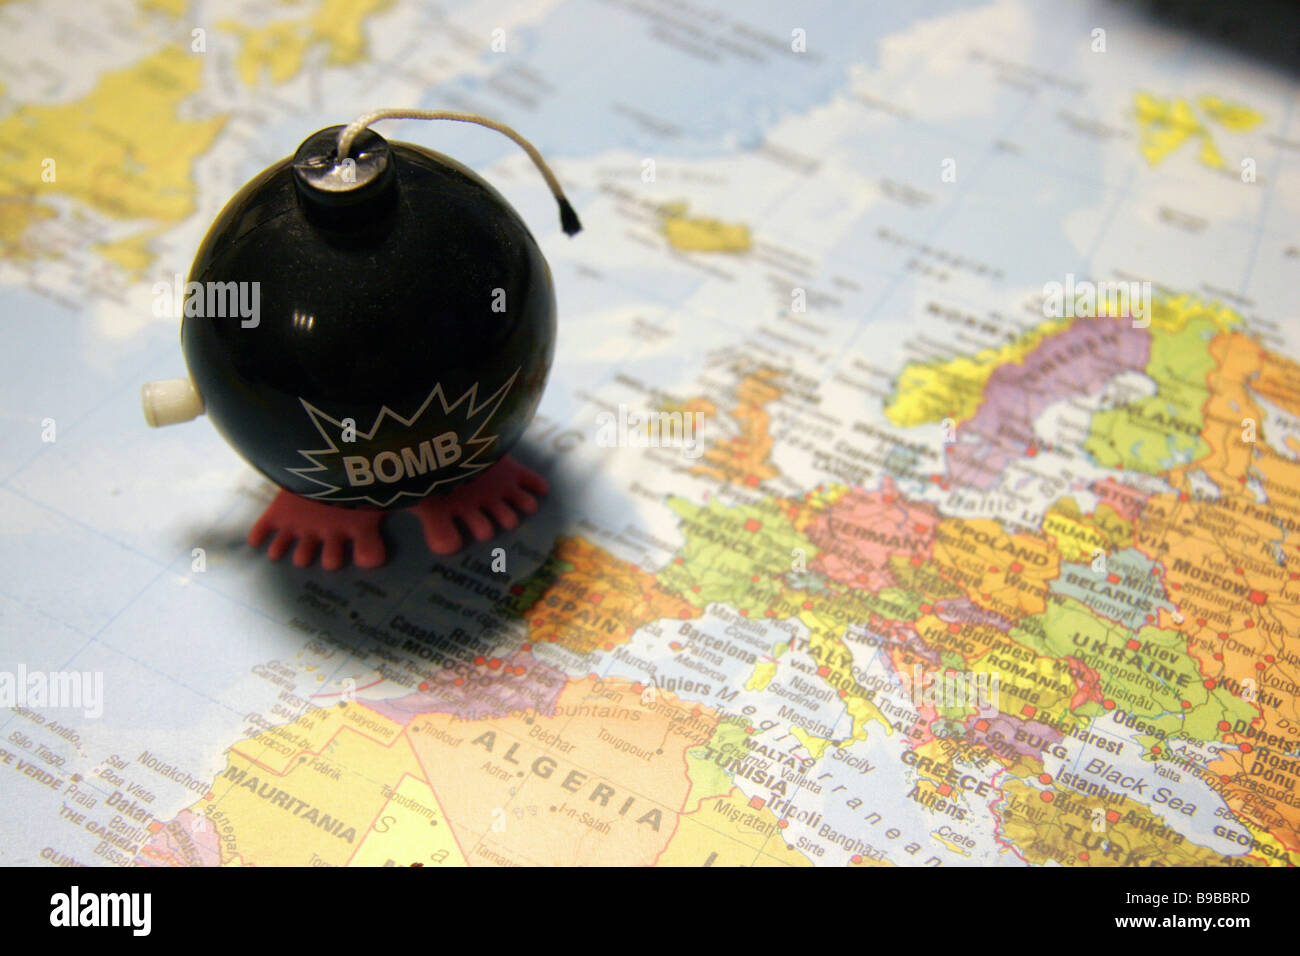 Bomb toy over map of Europe and North Africa Stock Photo